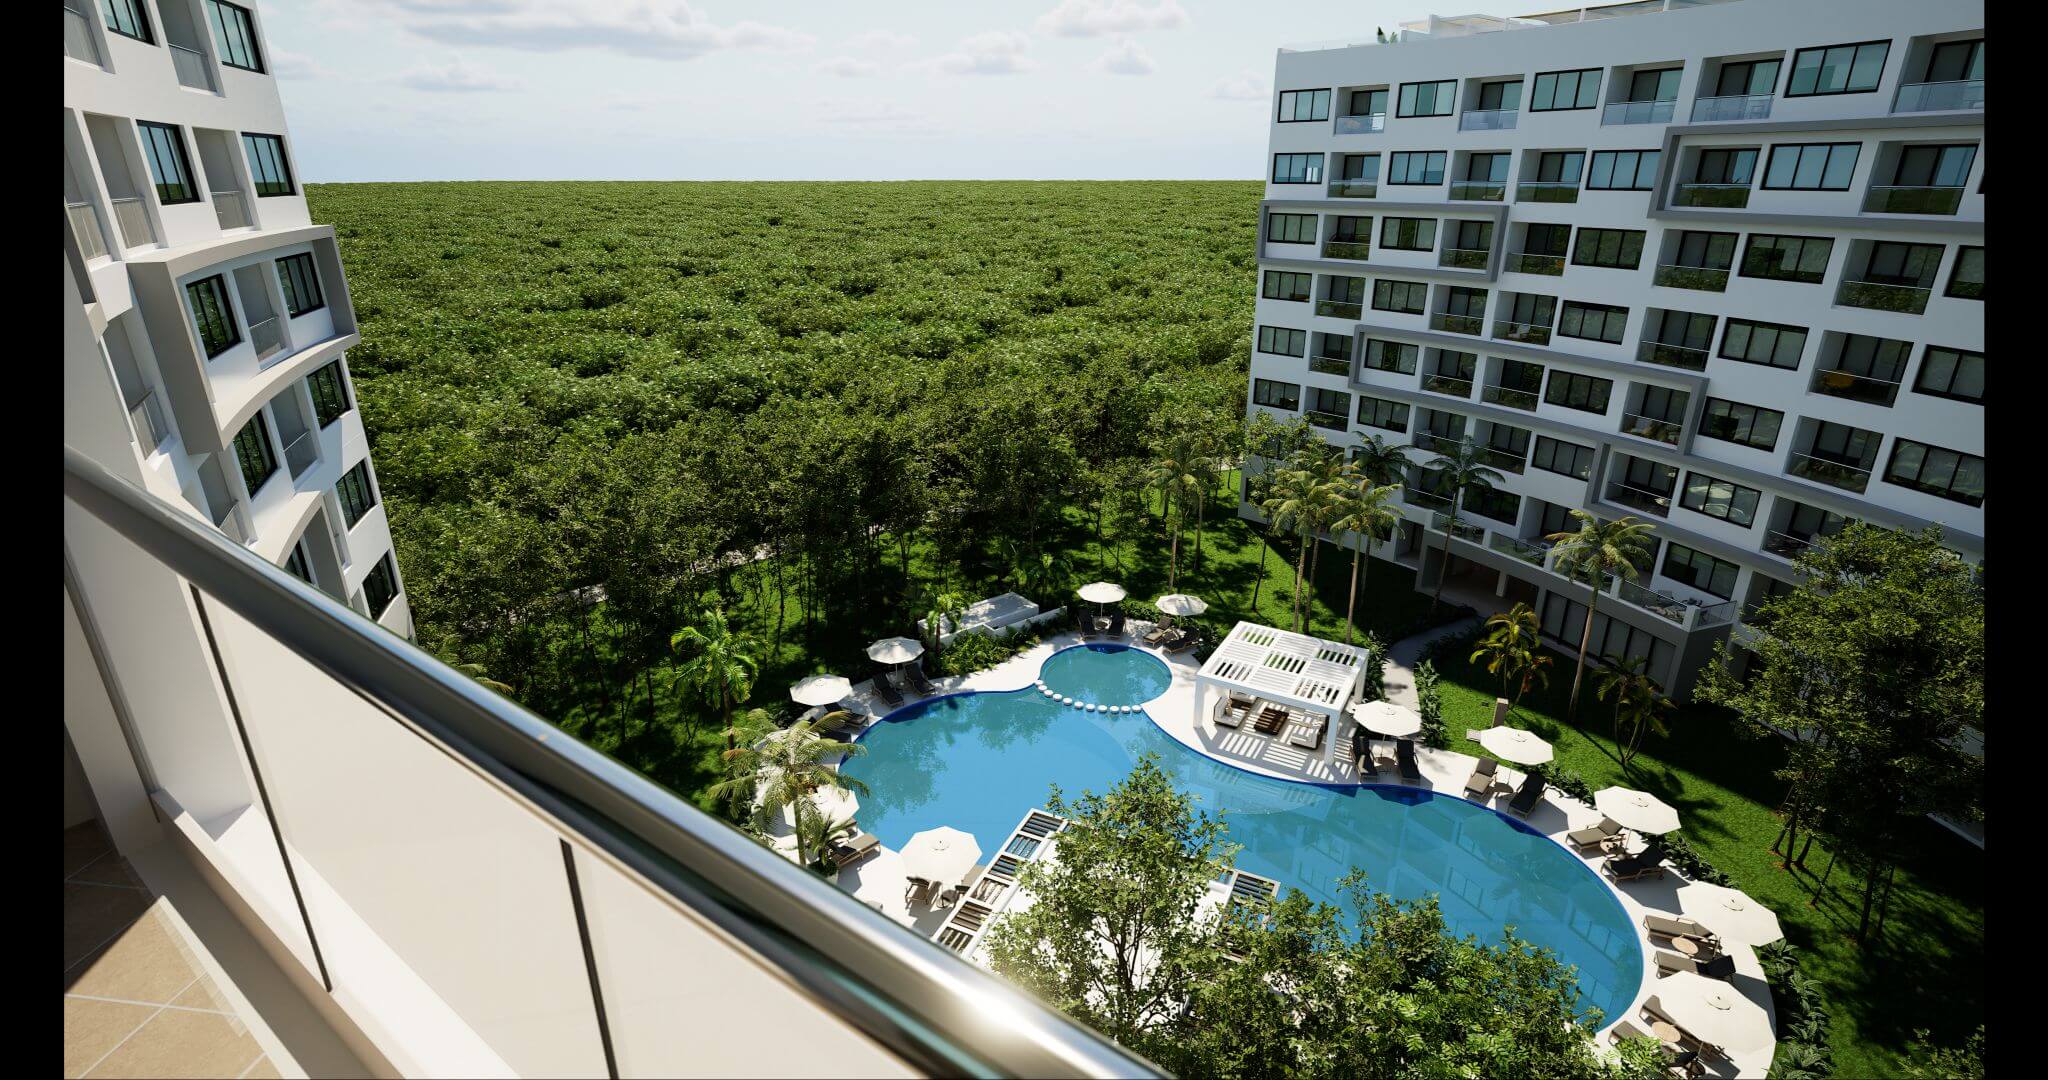 Double height apartment, luxury finishes, with beach club, golf course, more than 20 amenities, for sale, Corasol, Playa del Carmen, pre-con